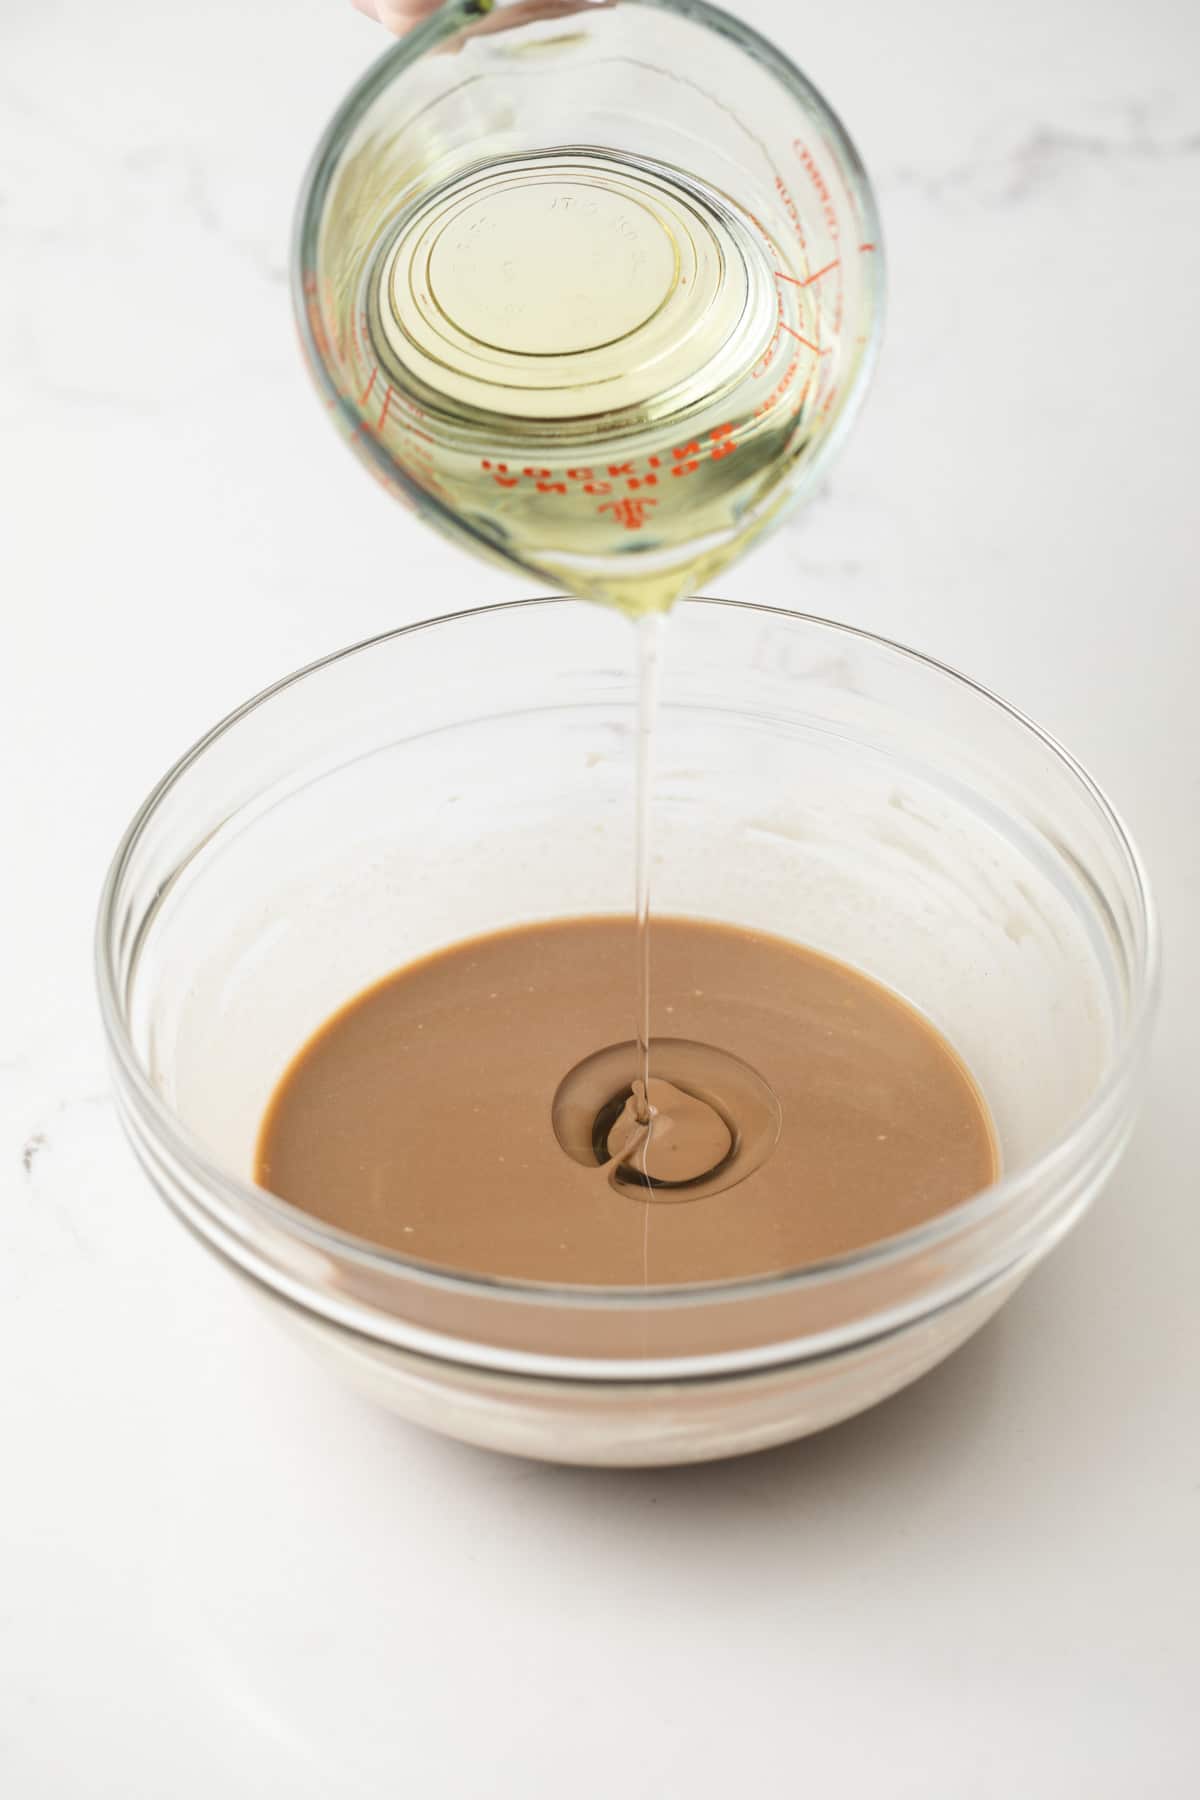 Adding oil to balsamic dressing